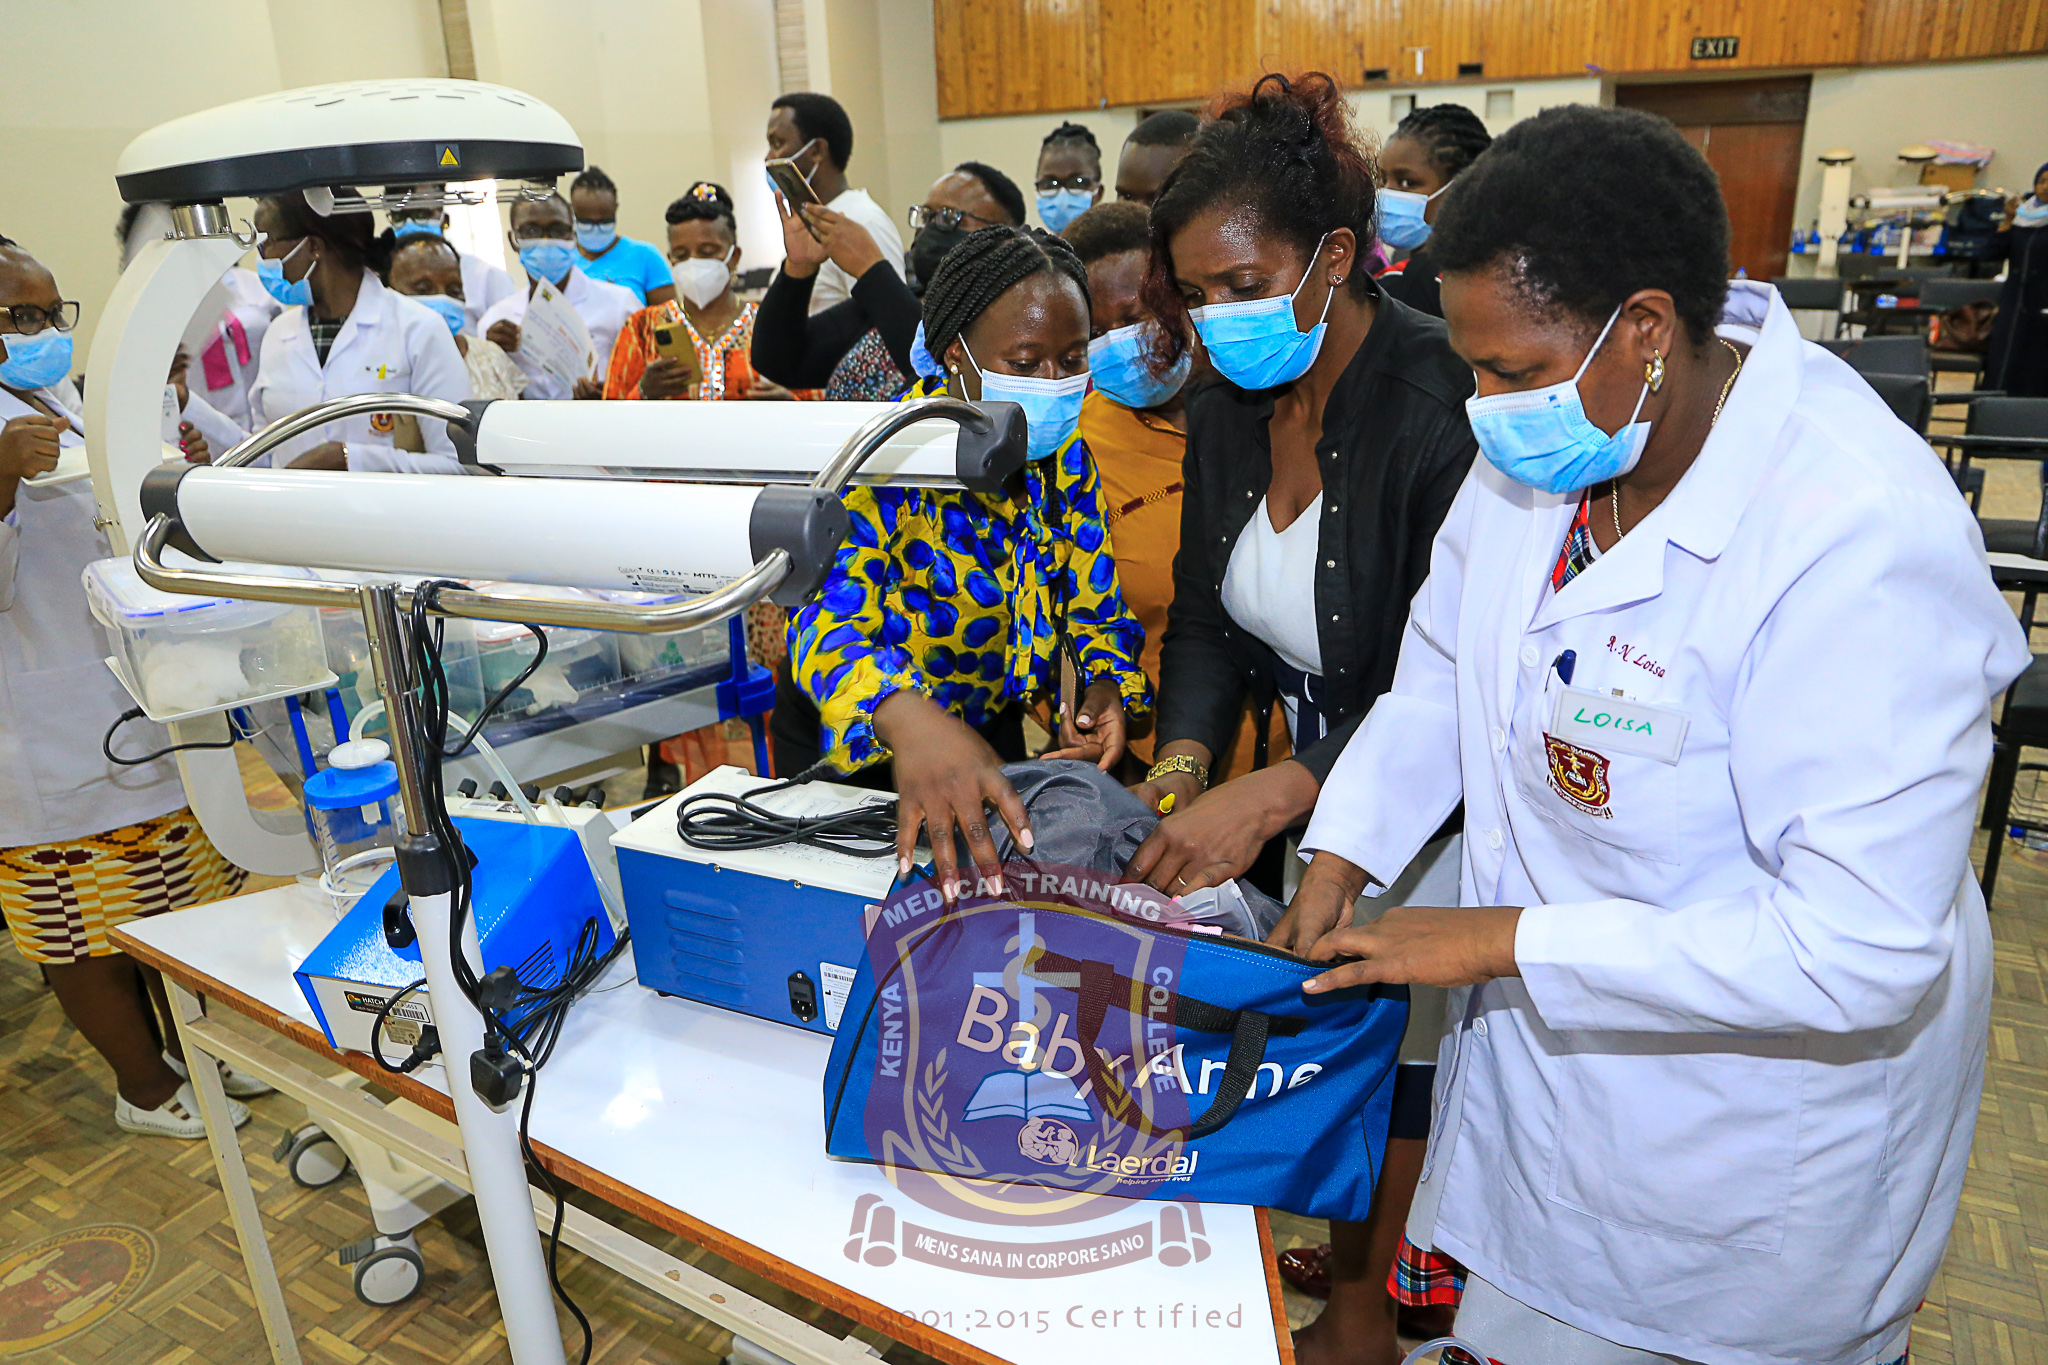 KMTC benefits from specialized Training for Lecturers and Clinical Mentors, Receives Training Equipment